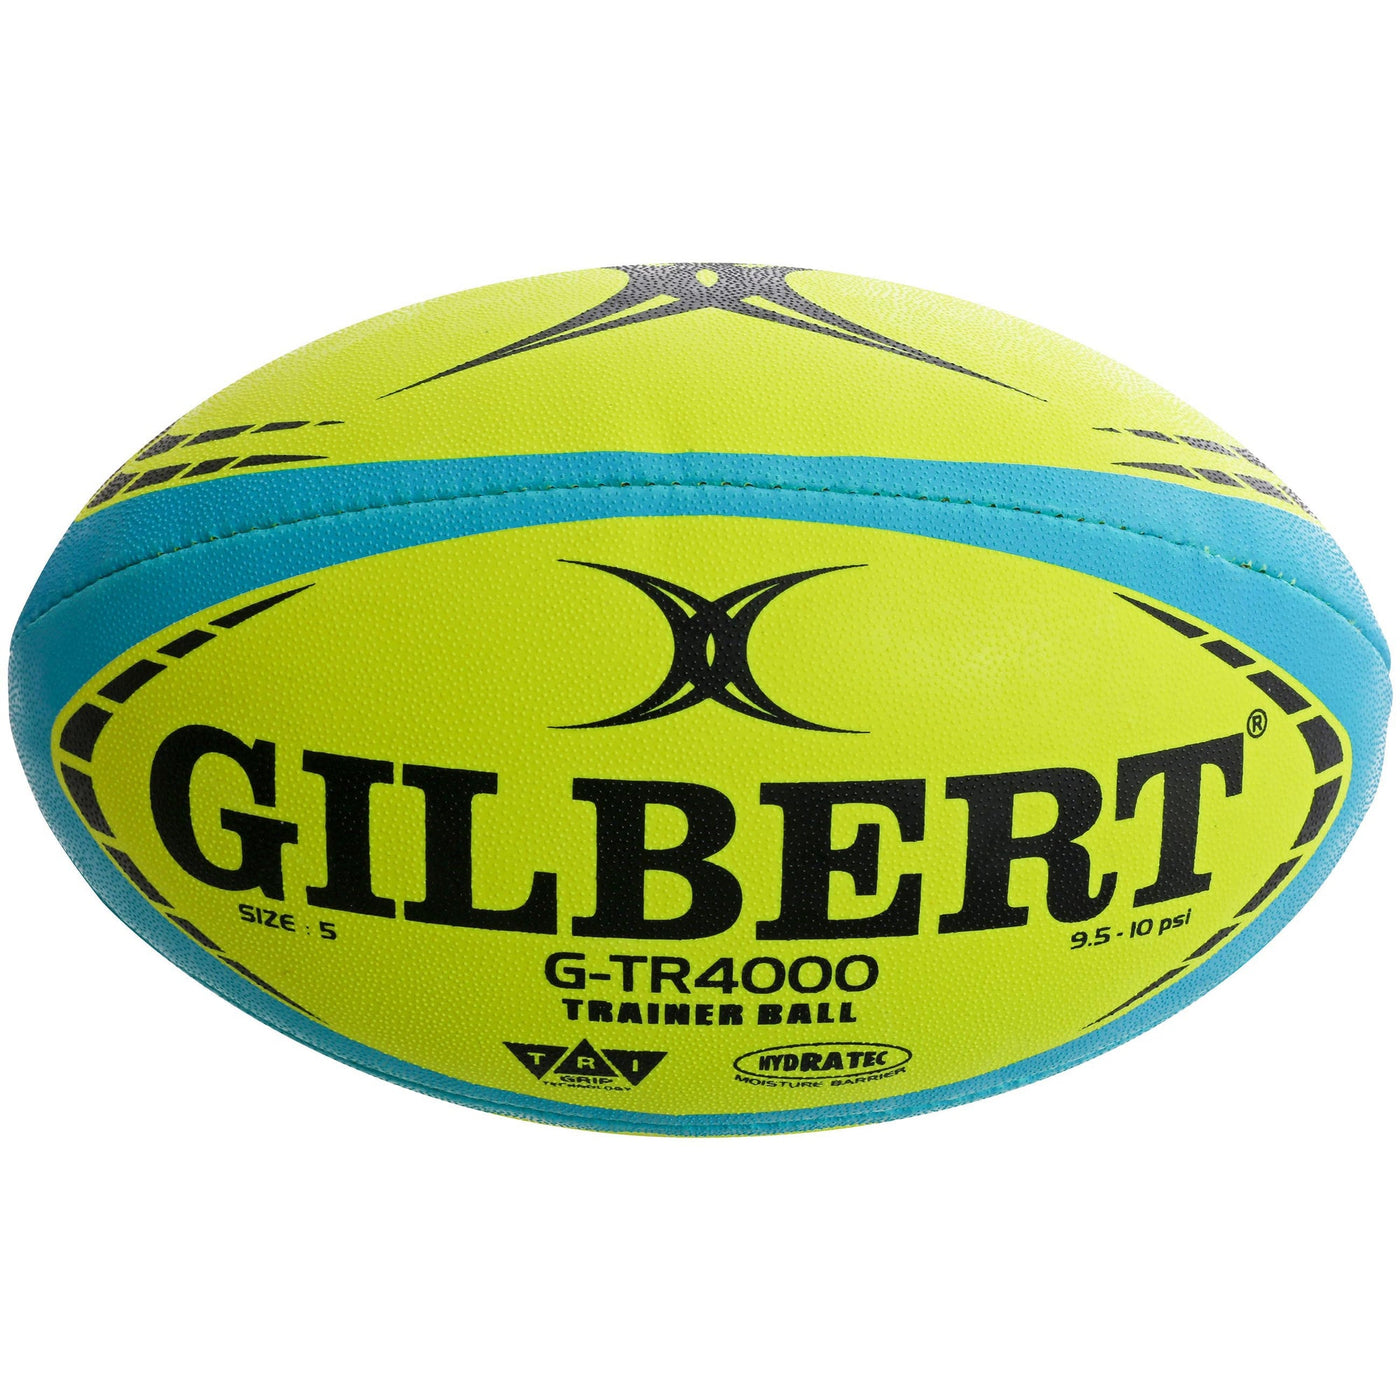 G-TR4000 Ballon Rugby Jaune Fluo Taille 5